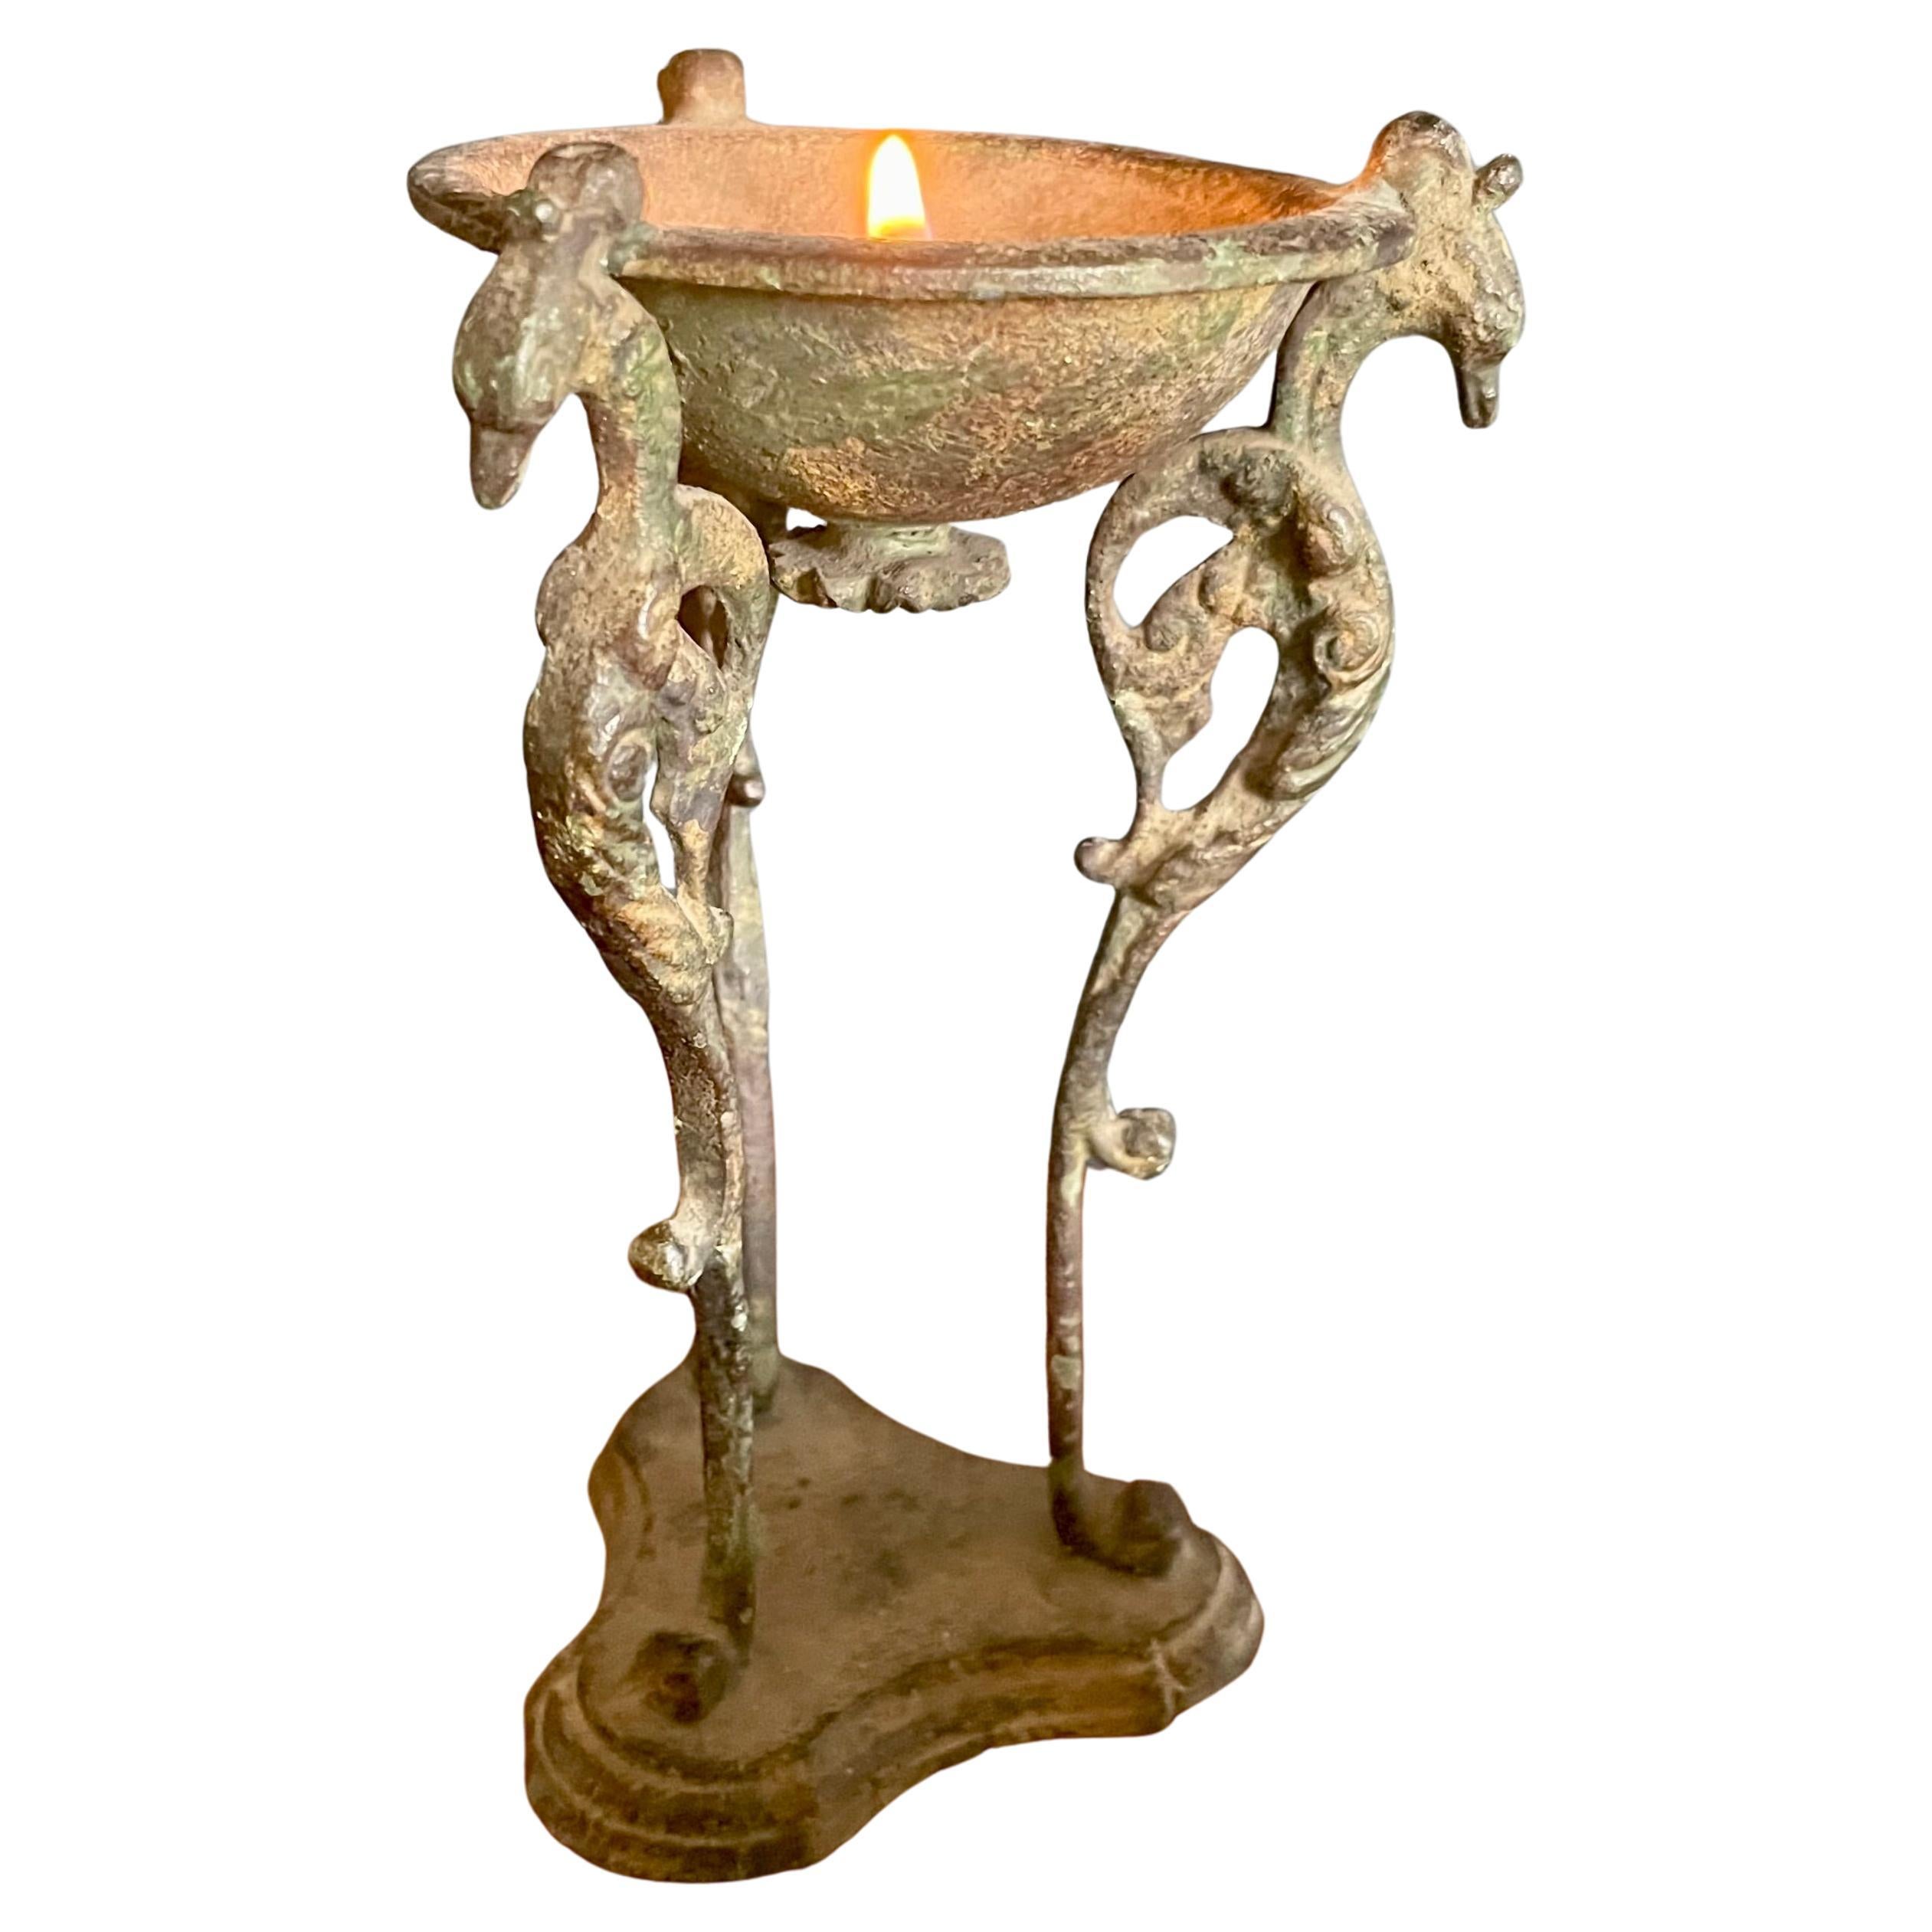 Bronze Vogel Tripod Candle Stand